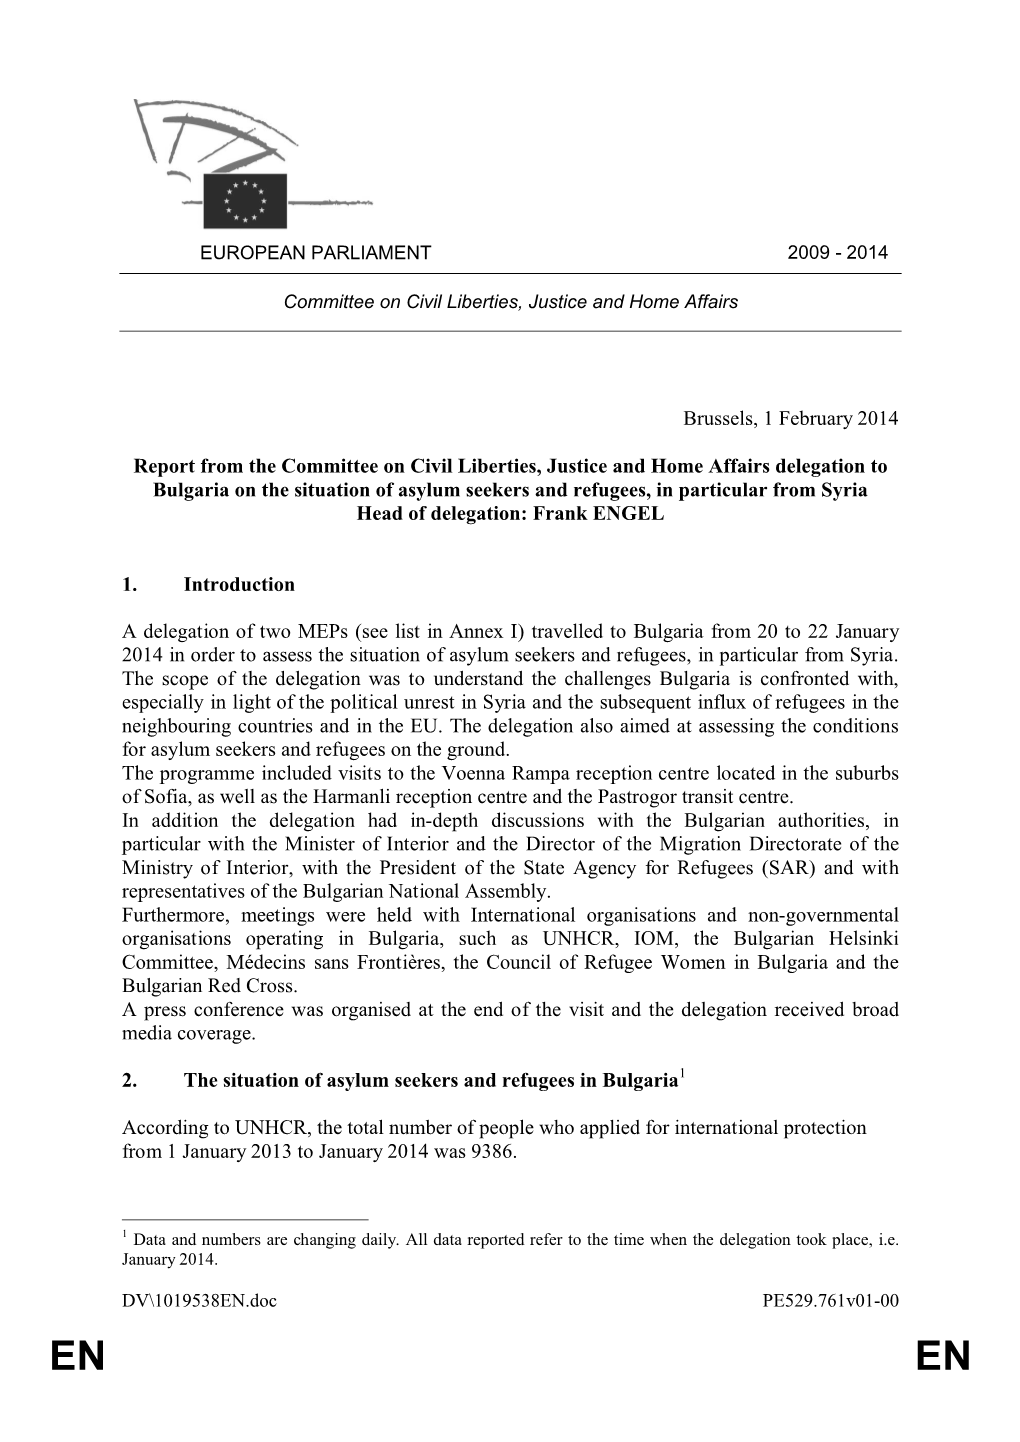 Brussels, 1 February 2014 Report from the Committee on Civil Liberties, Justice and Home Affairs Delegation to Bulgaria on the S